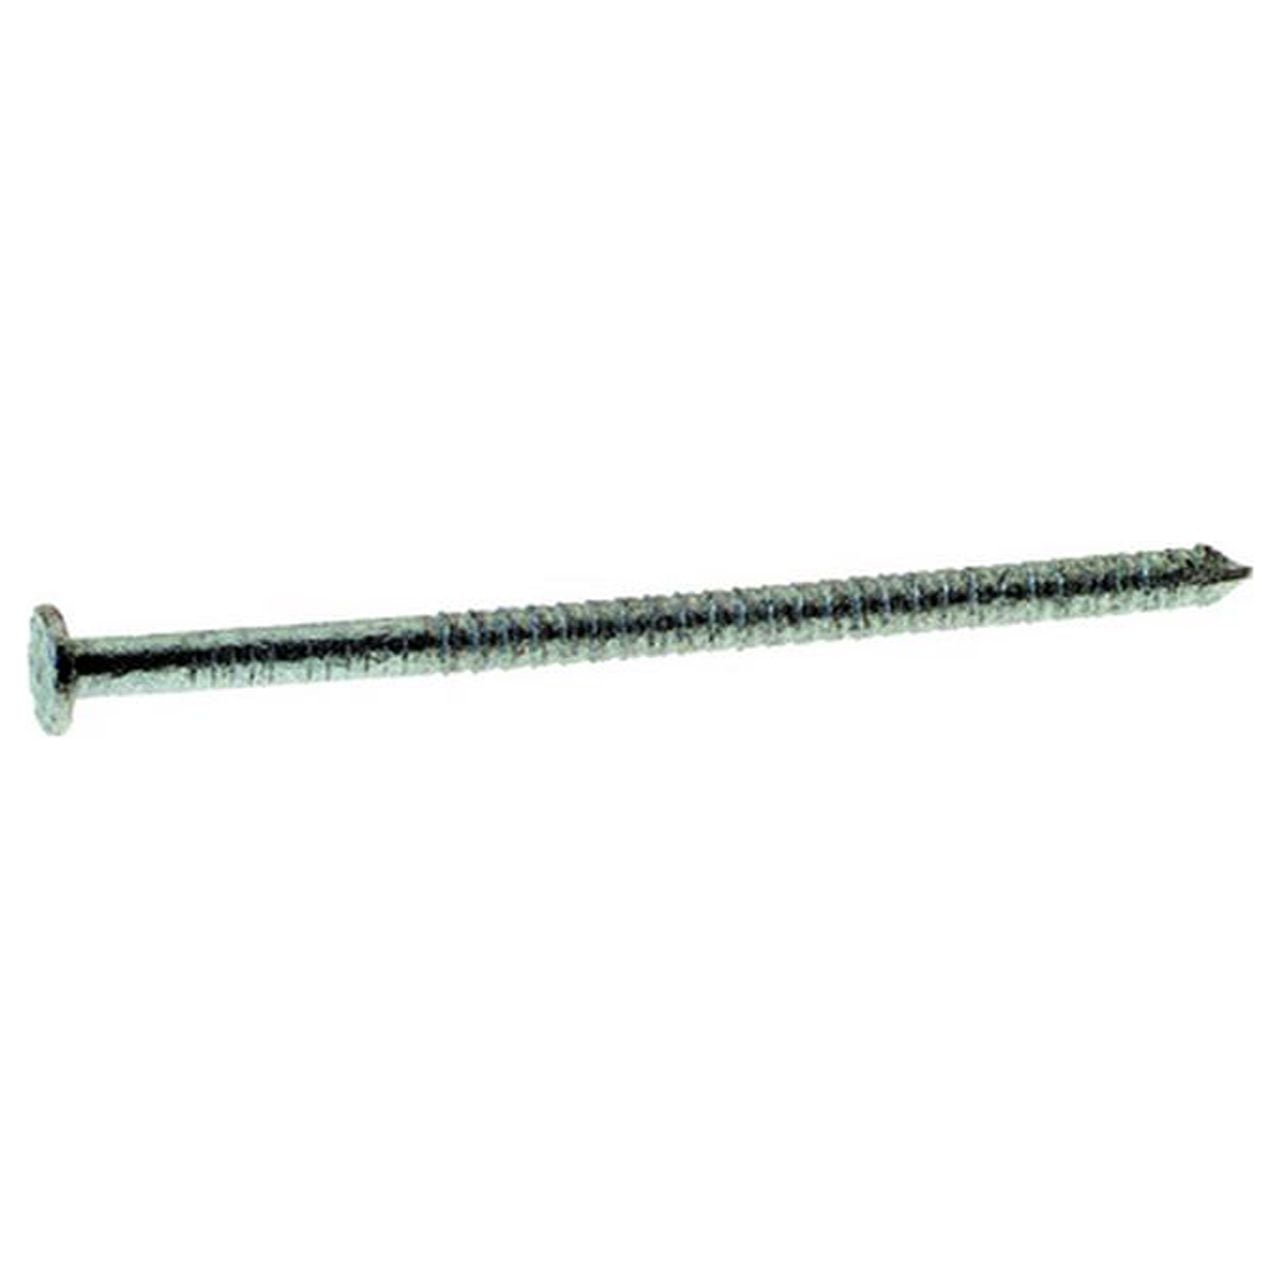 Prime Source 16hgrspd1 16 In. Hot Galvanized Ring Shank Deck Nail, 1 Lbs